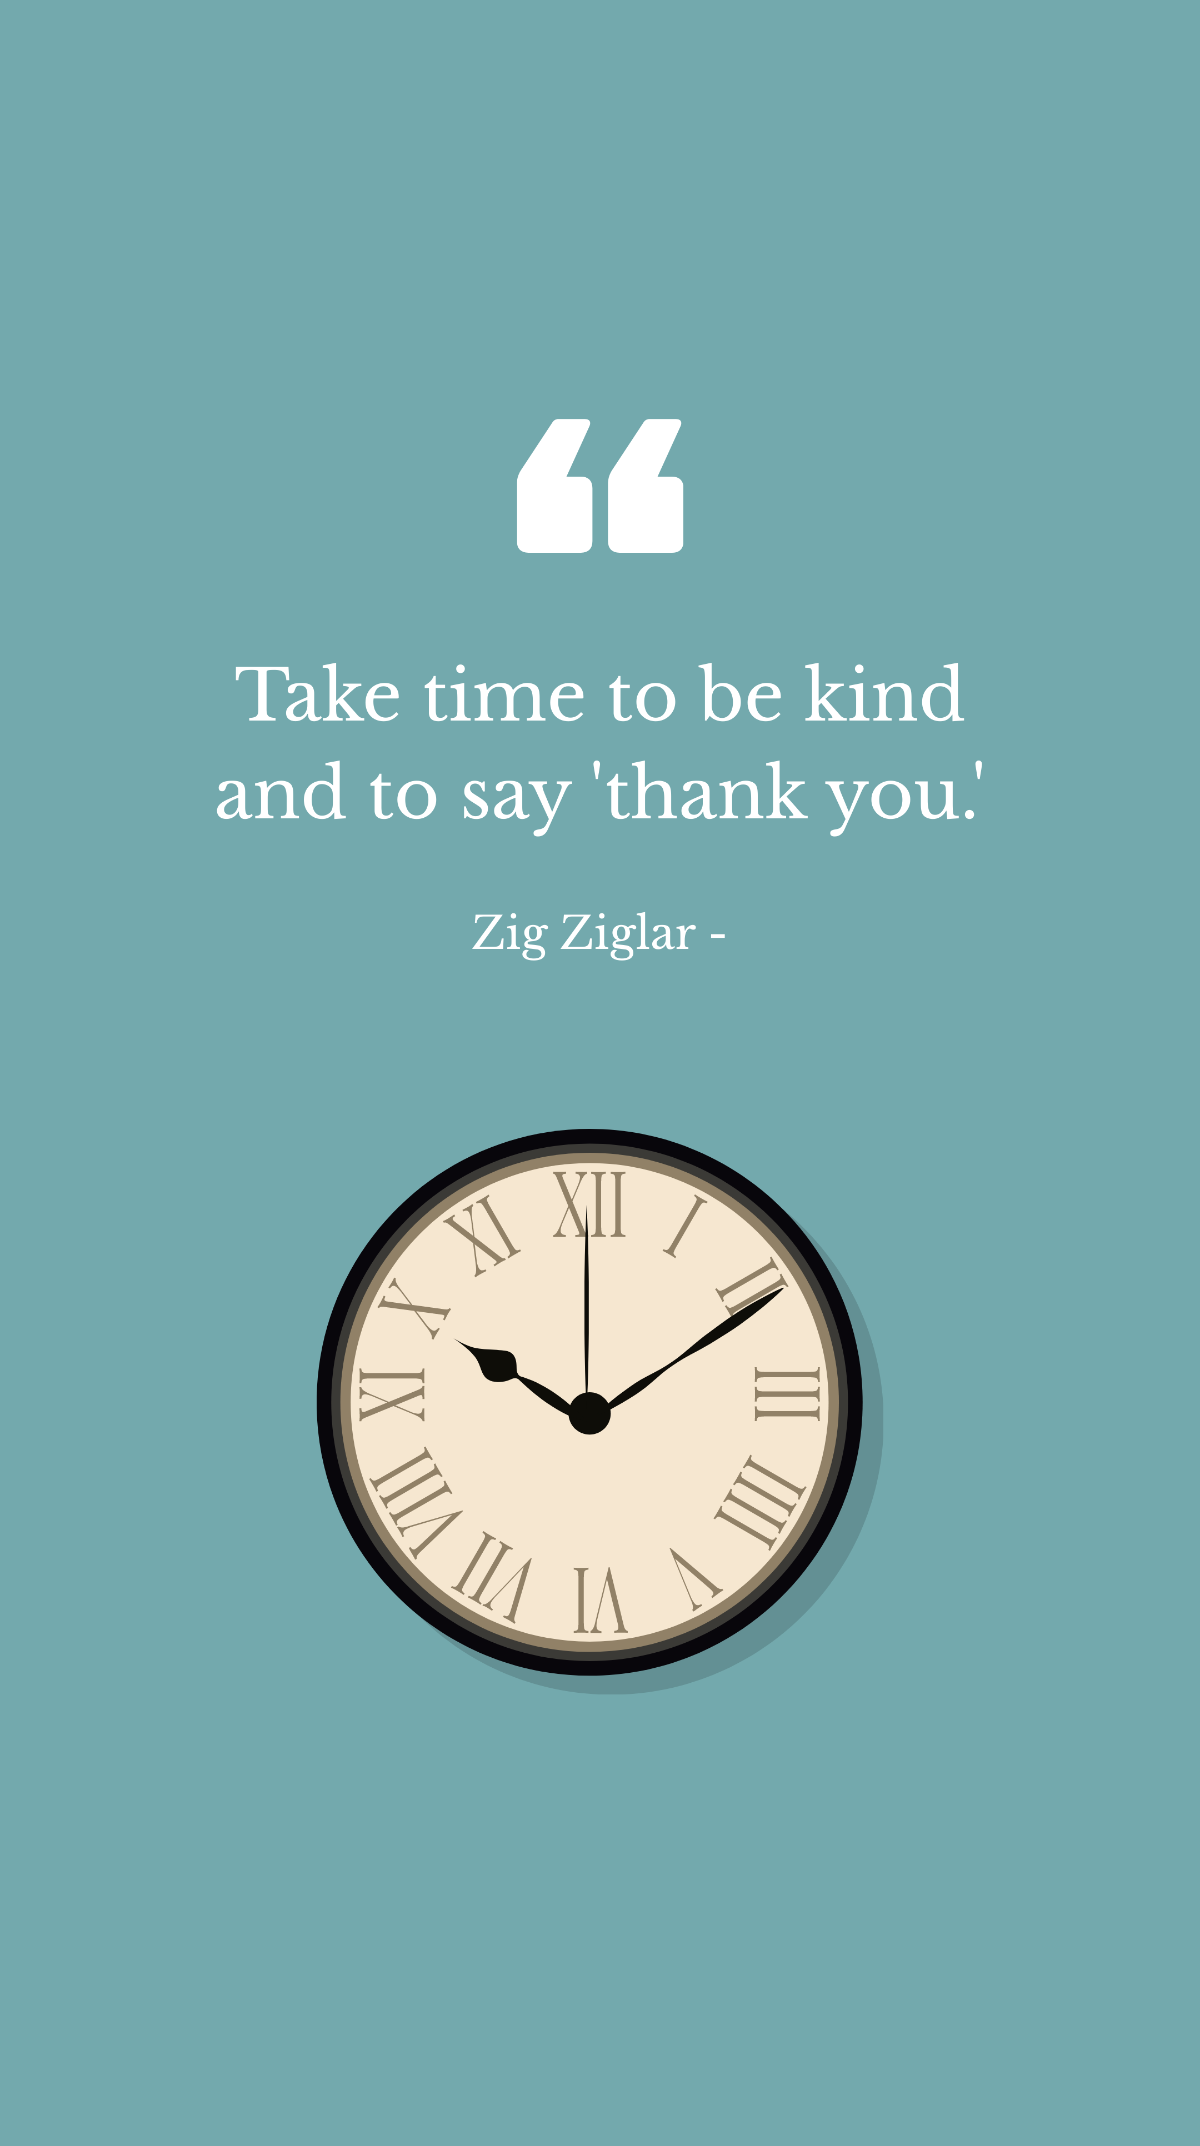 Zig Ziglar - Take time to be kind and to say 'thank you.' Template